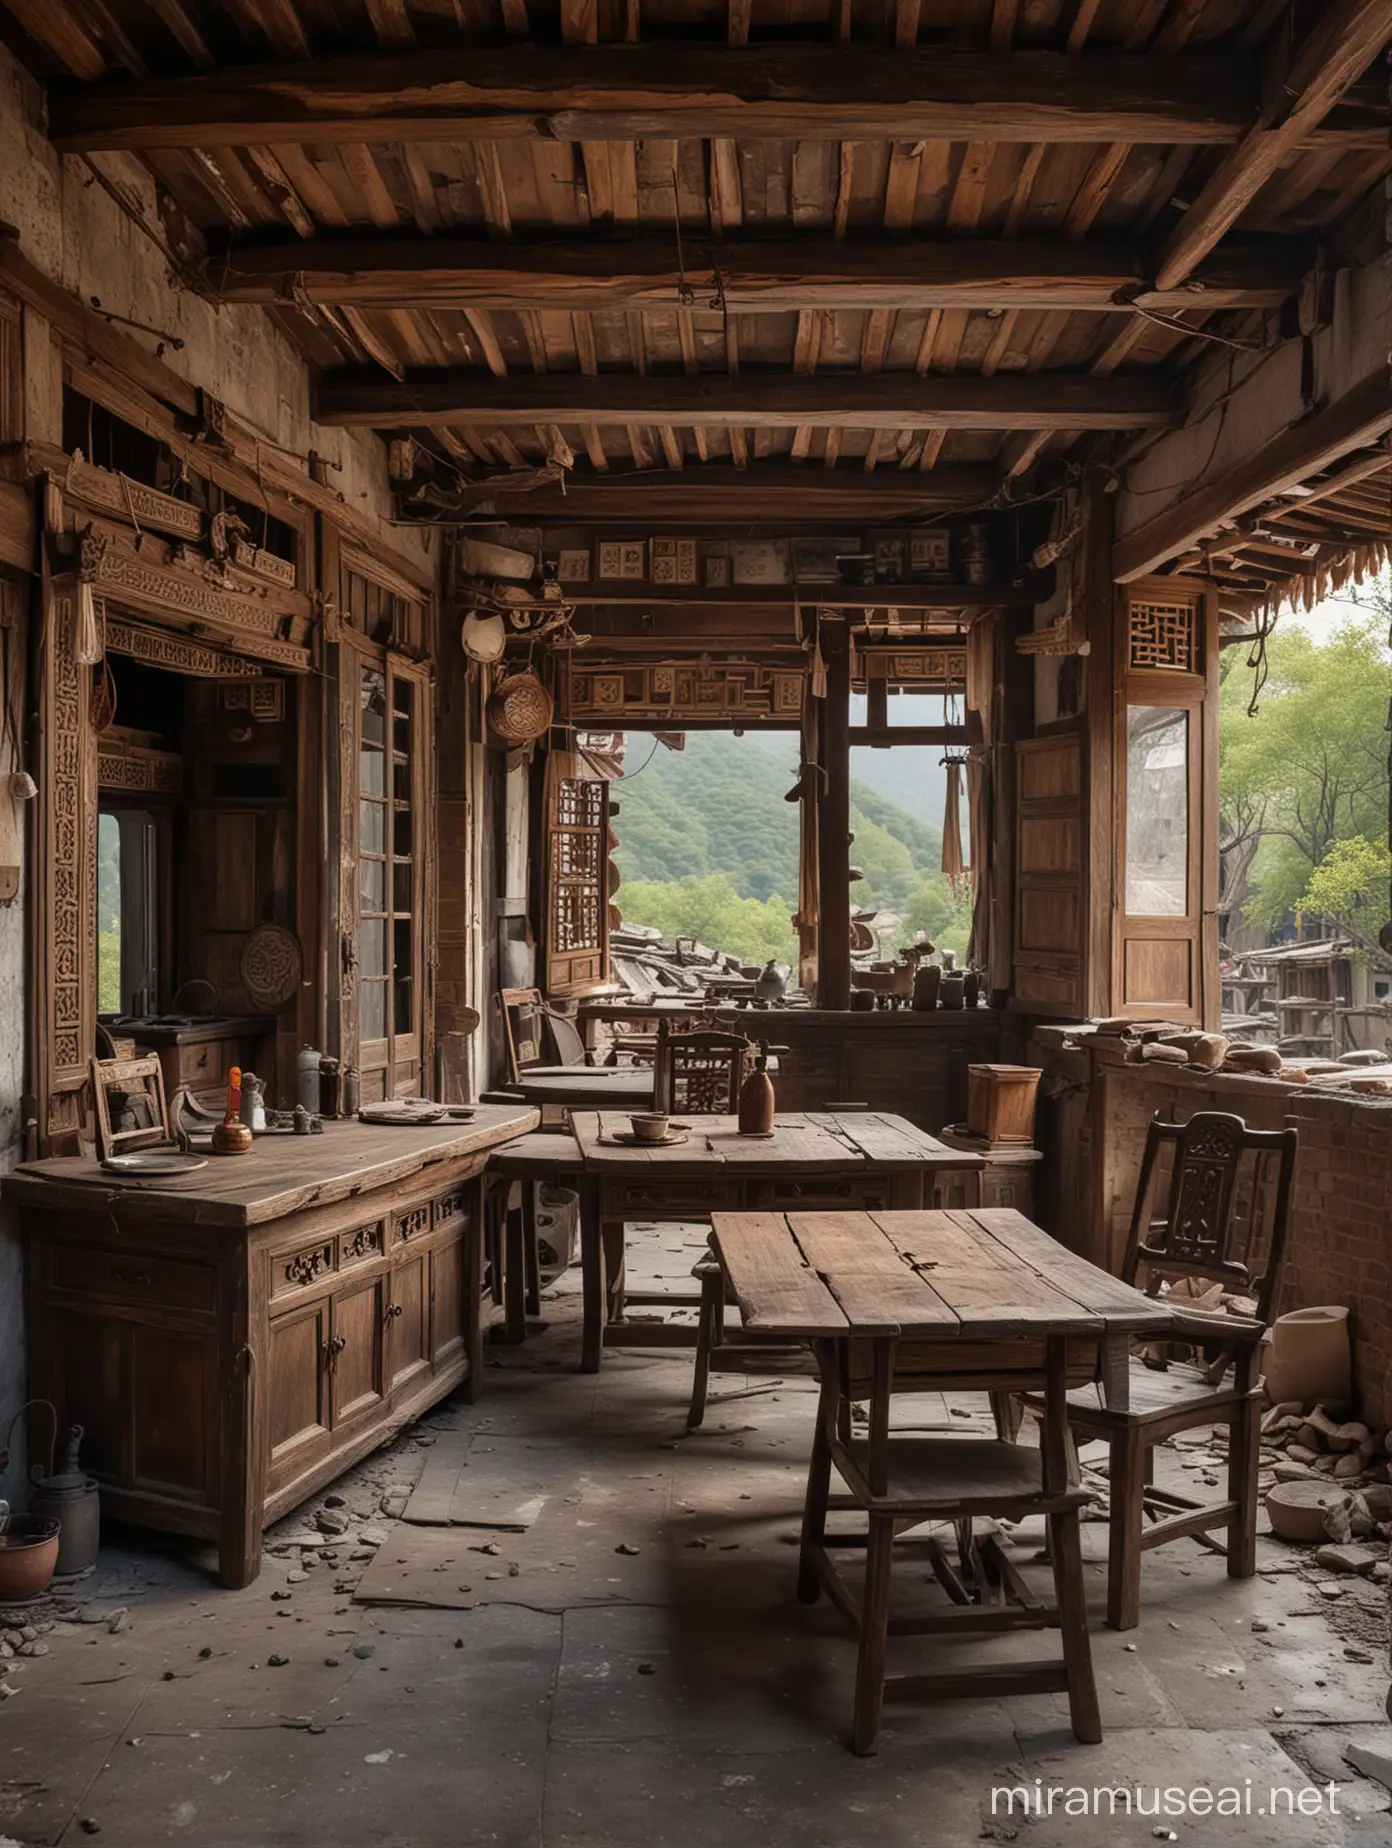 Dilapidated Chinese Mountain Village Interior with Village Chiefs Table